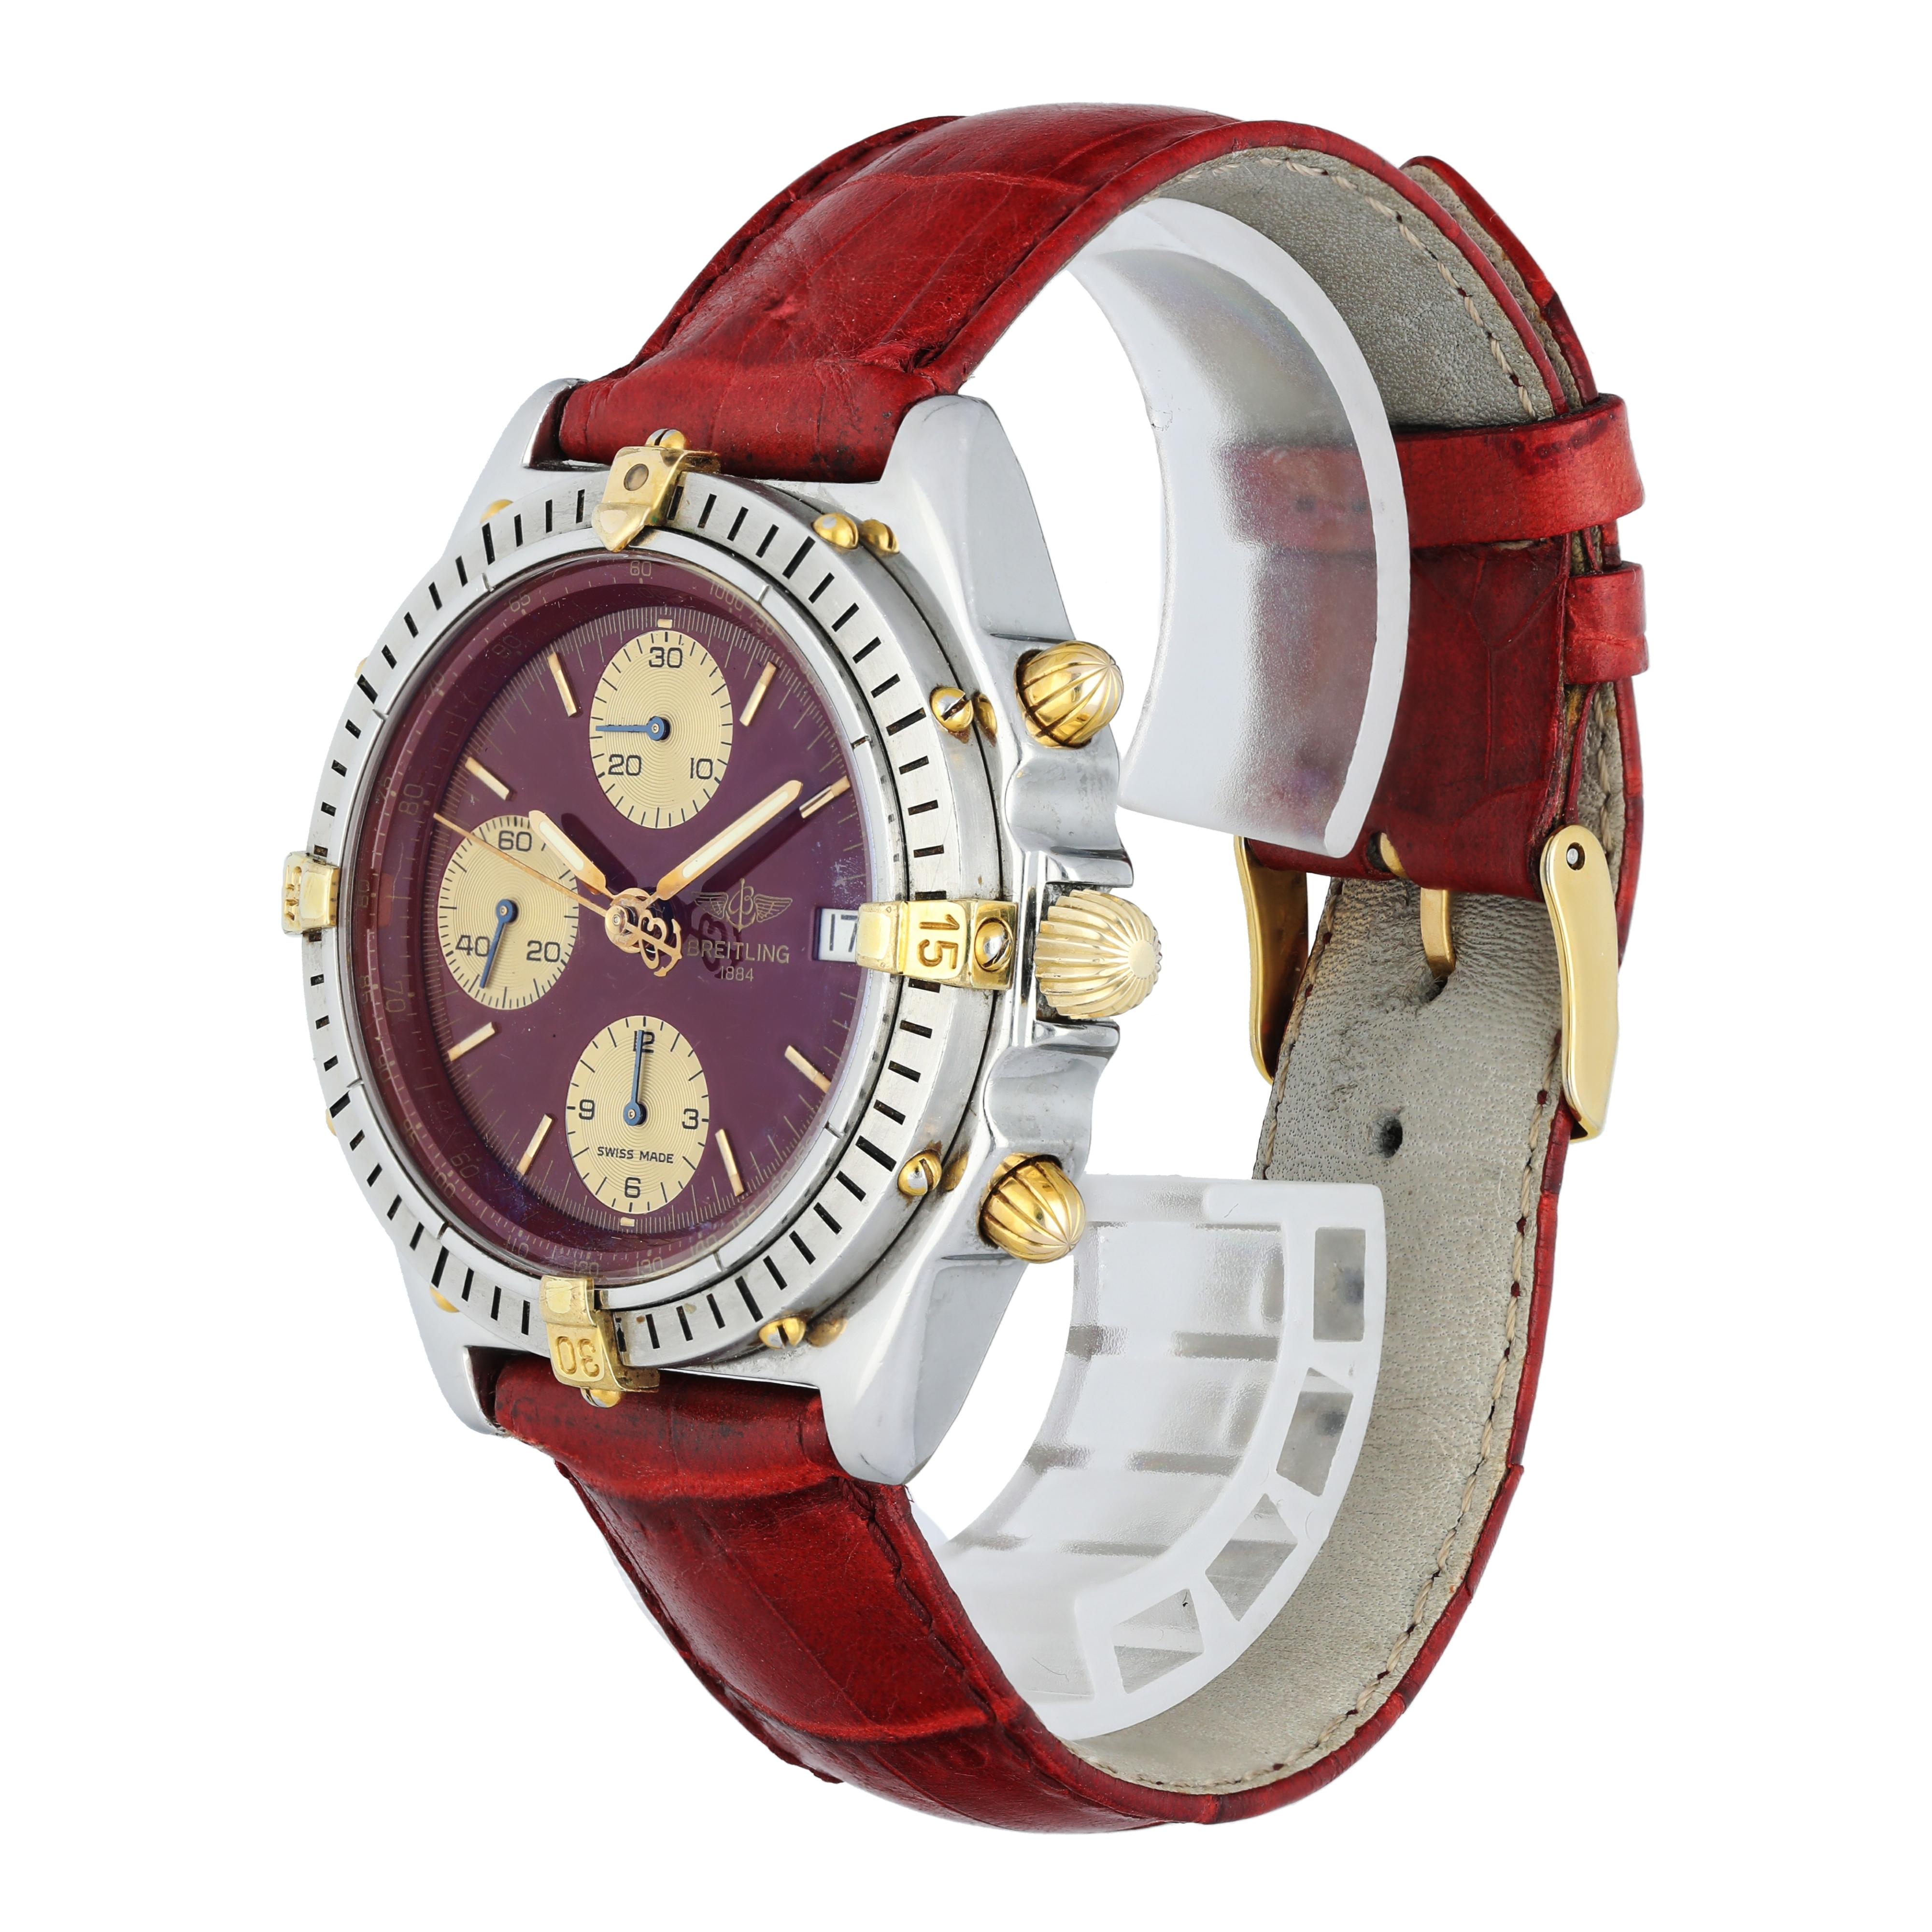 Breitling Chronomat B13048 Bordeaux Dial Men's Watch. 
40mm Stainless Steel case. 
Stainless Steel Unidirectional bezel. 
Red dial with Luminous gold hands and index hour markers. 
Minute markers on the outer dial. 
Date display at the 3 o'clock